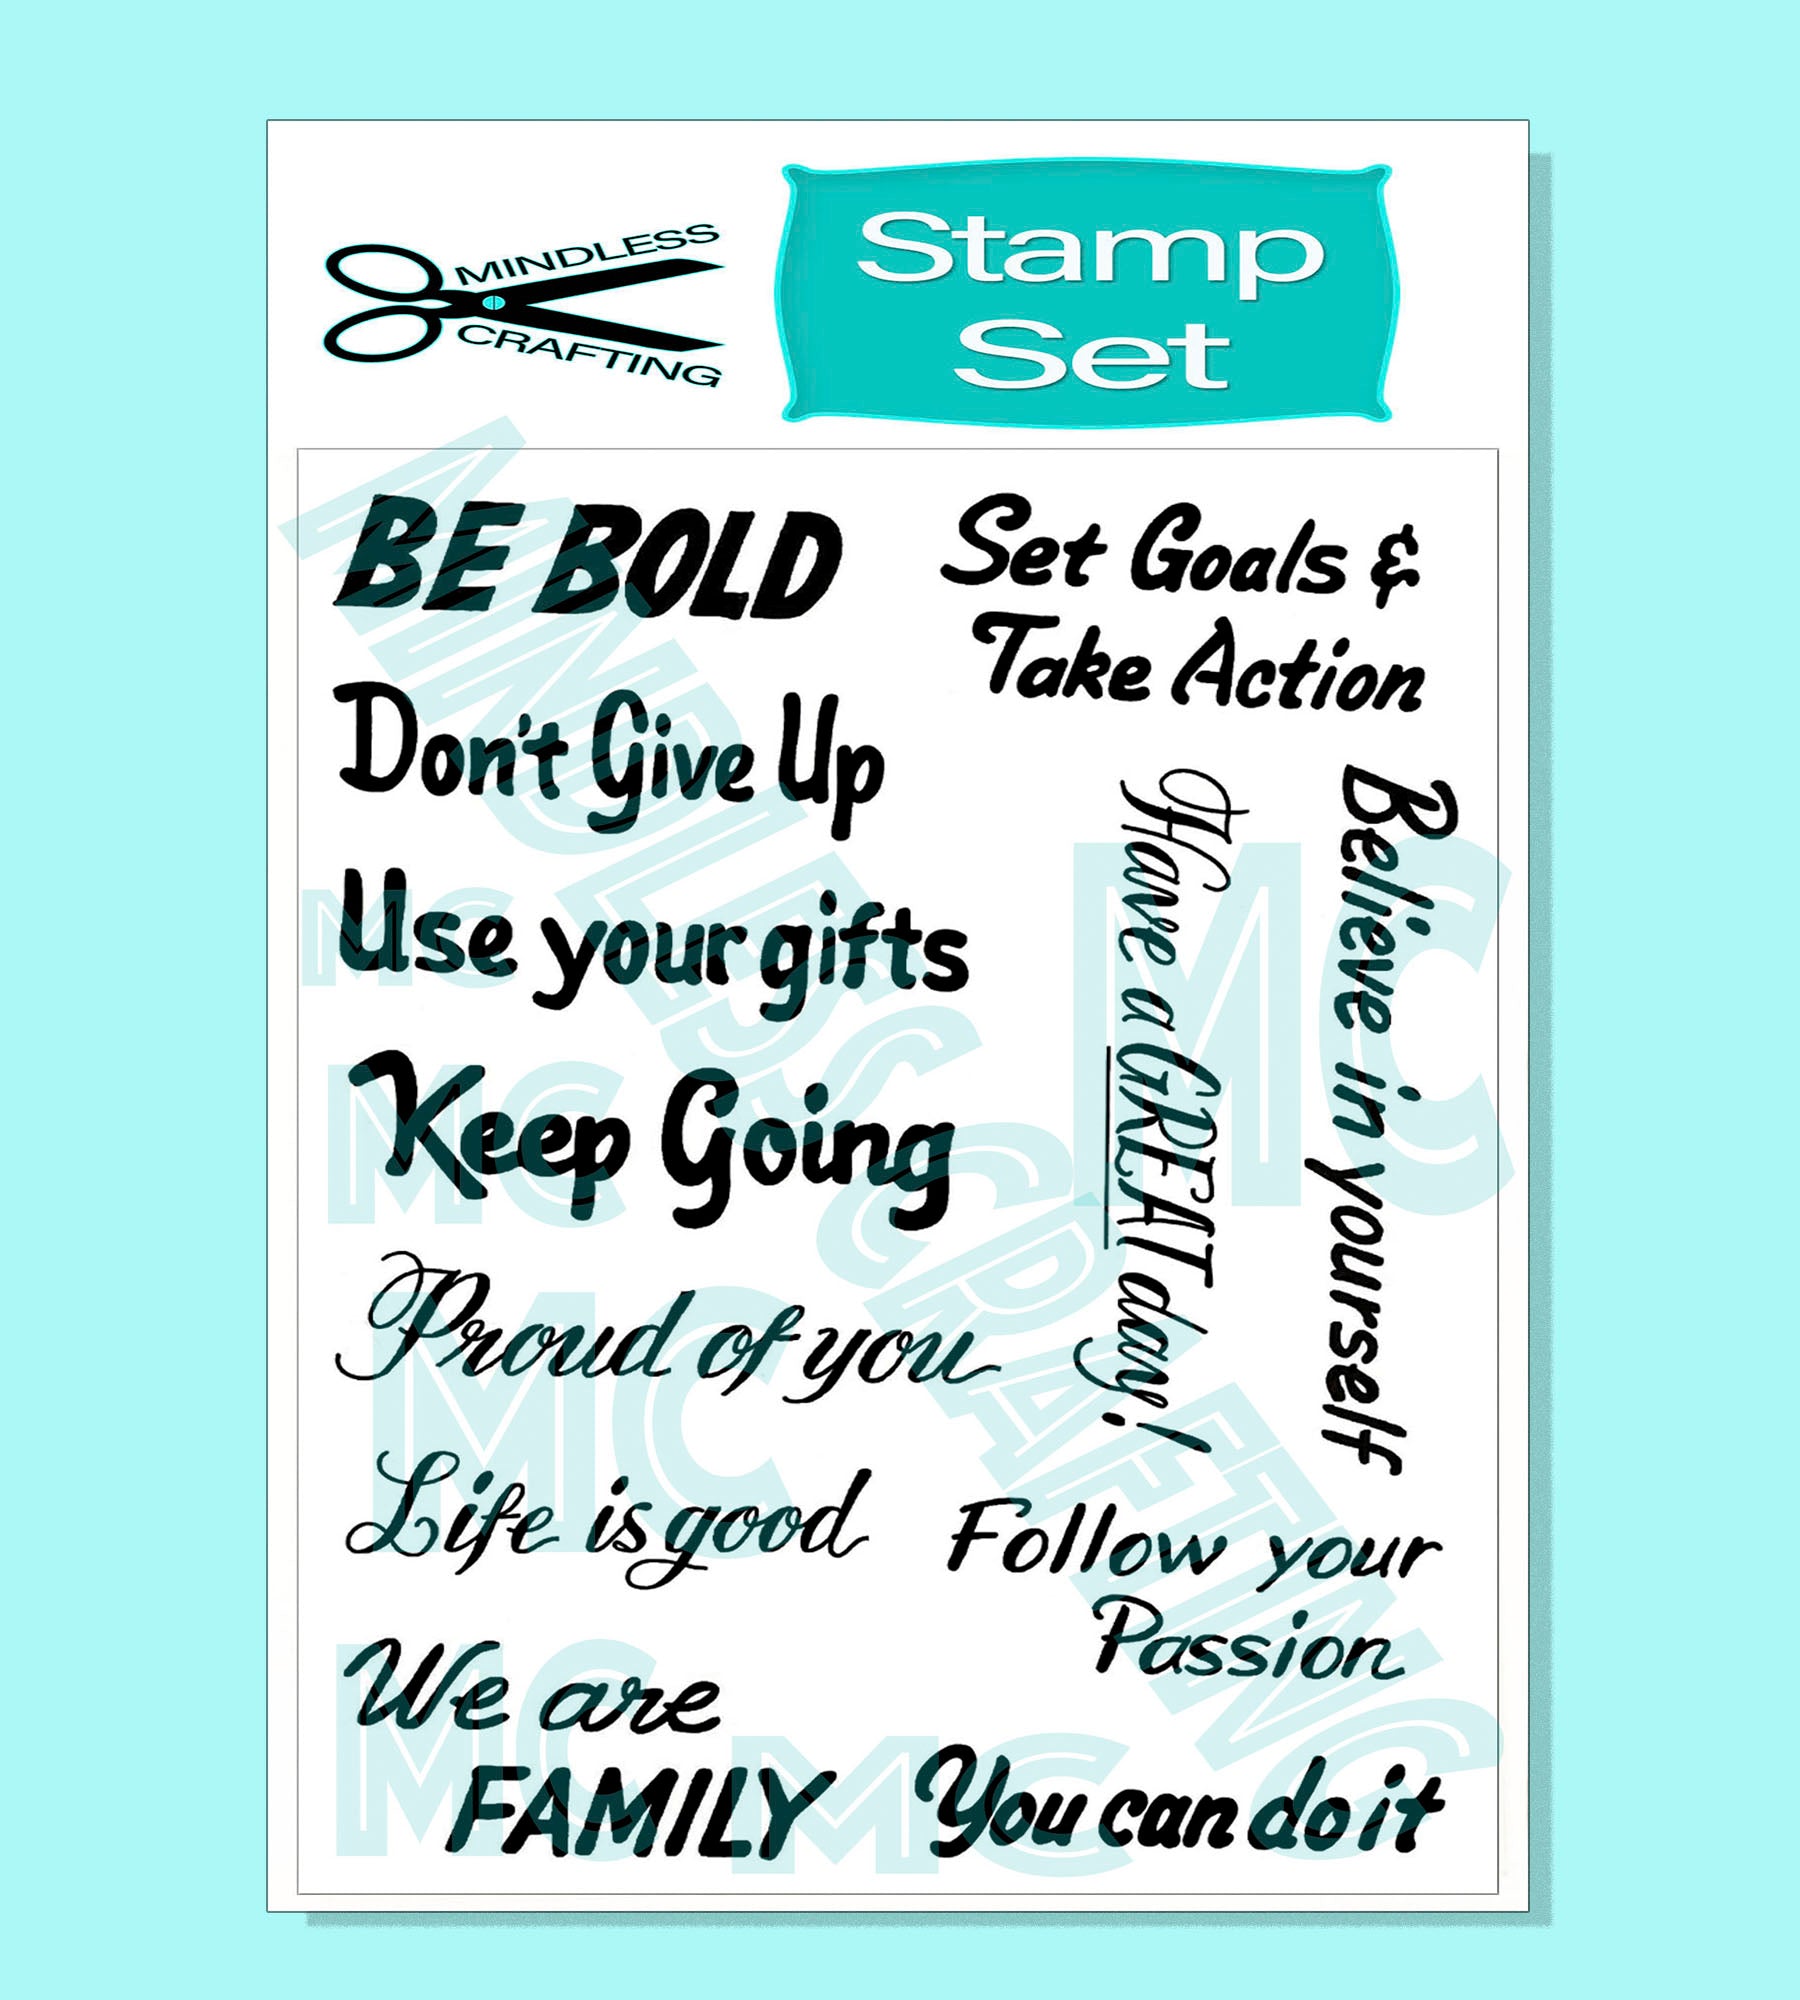 Power Words Rubber Stamps - Set of 6 – Make & Mend